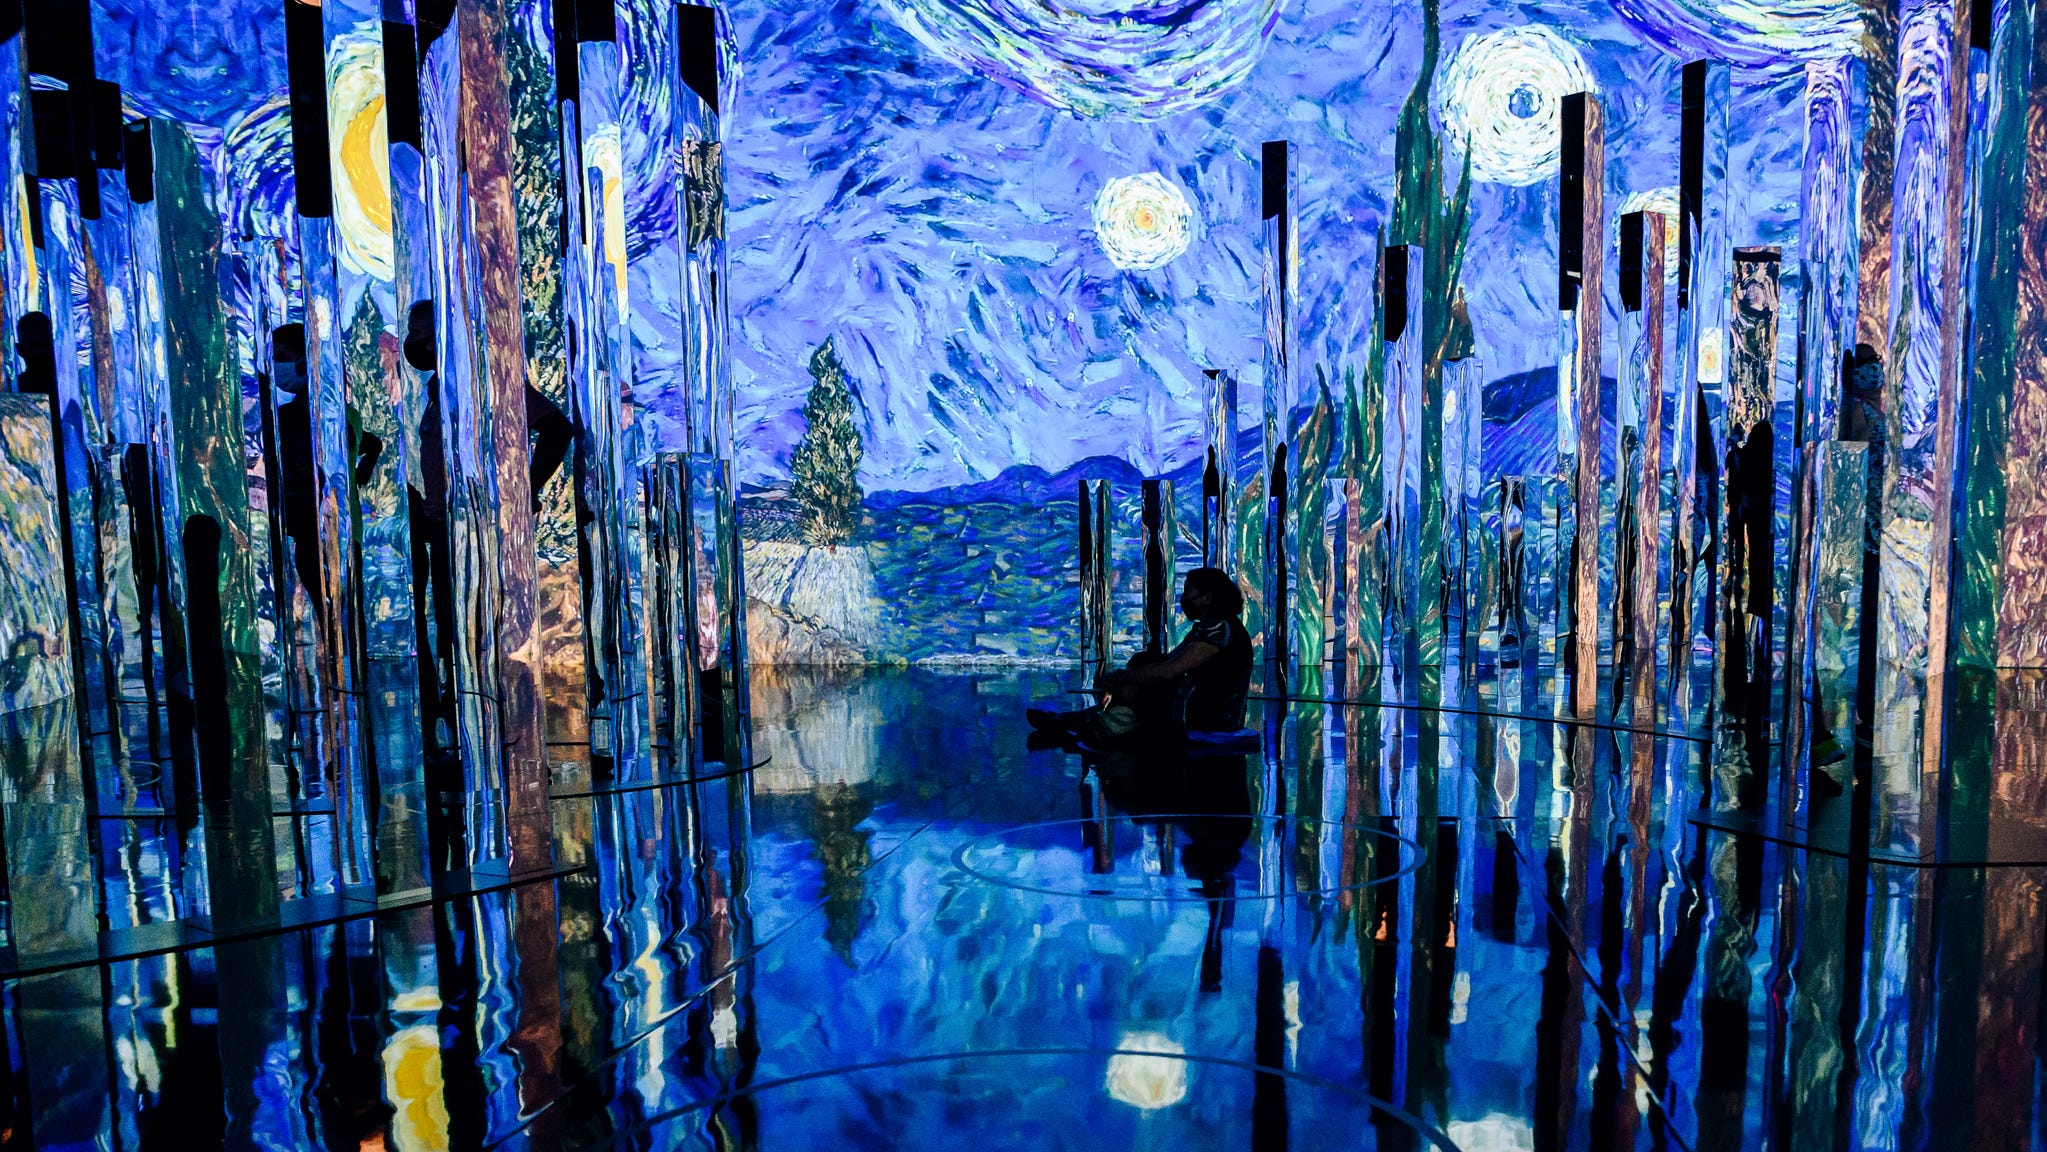 Immersive Van Gogh exhibit Tickets, cost, plus what to expect